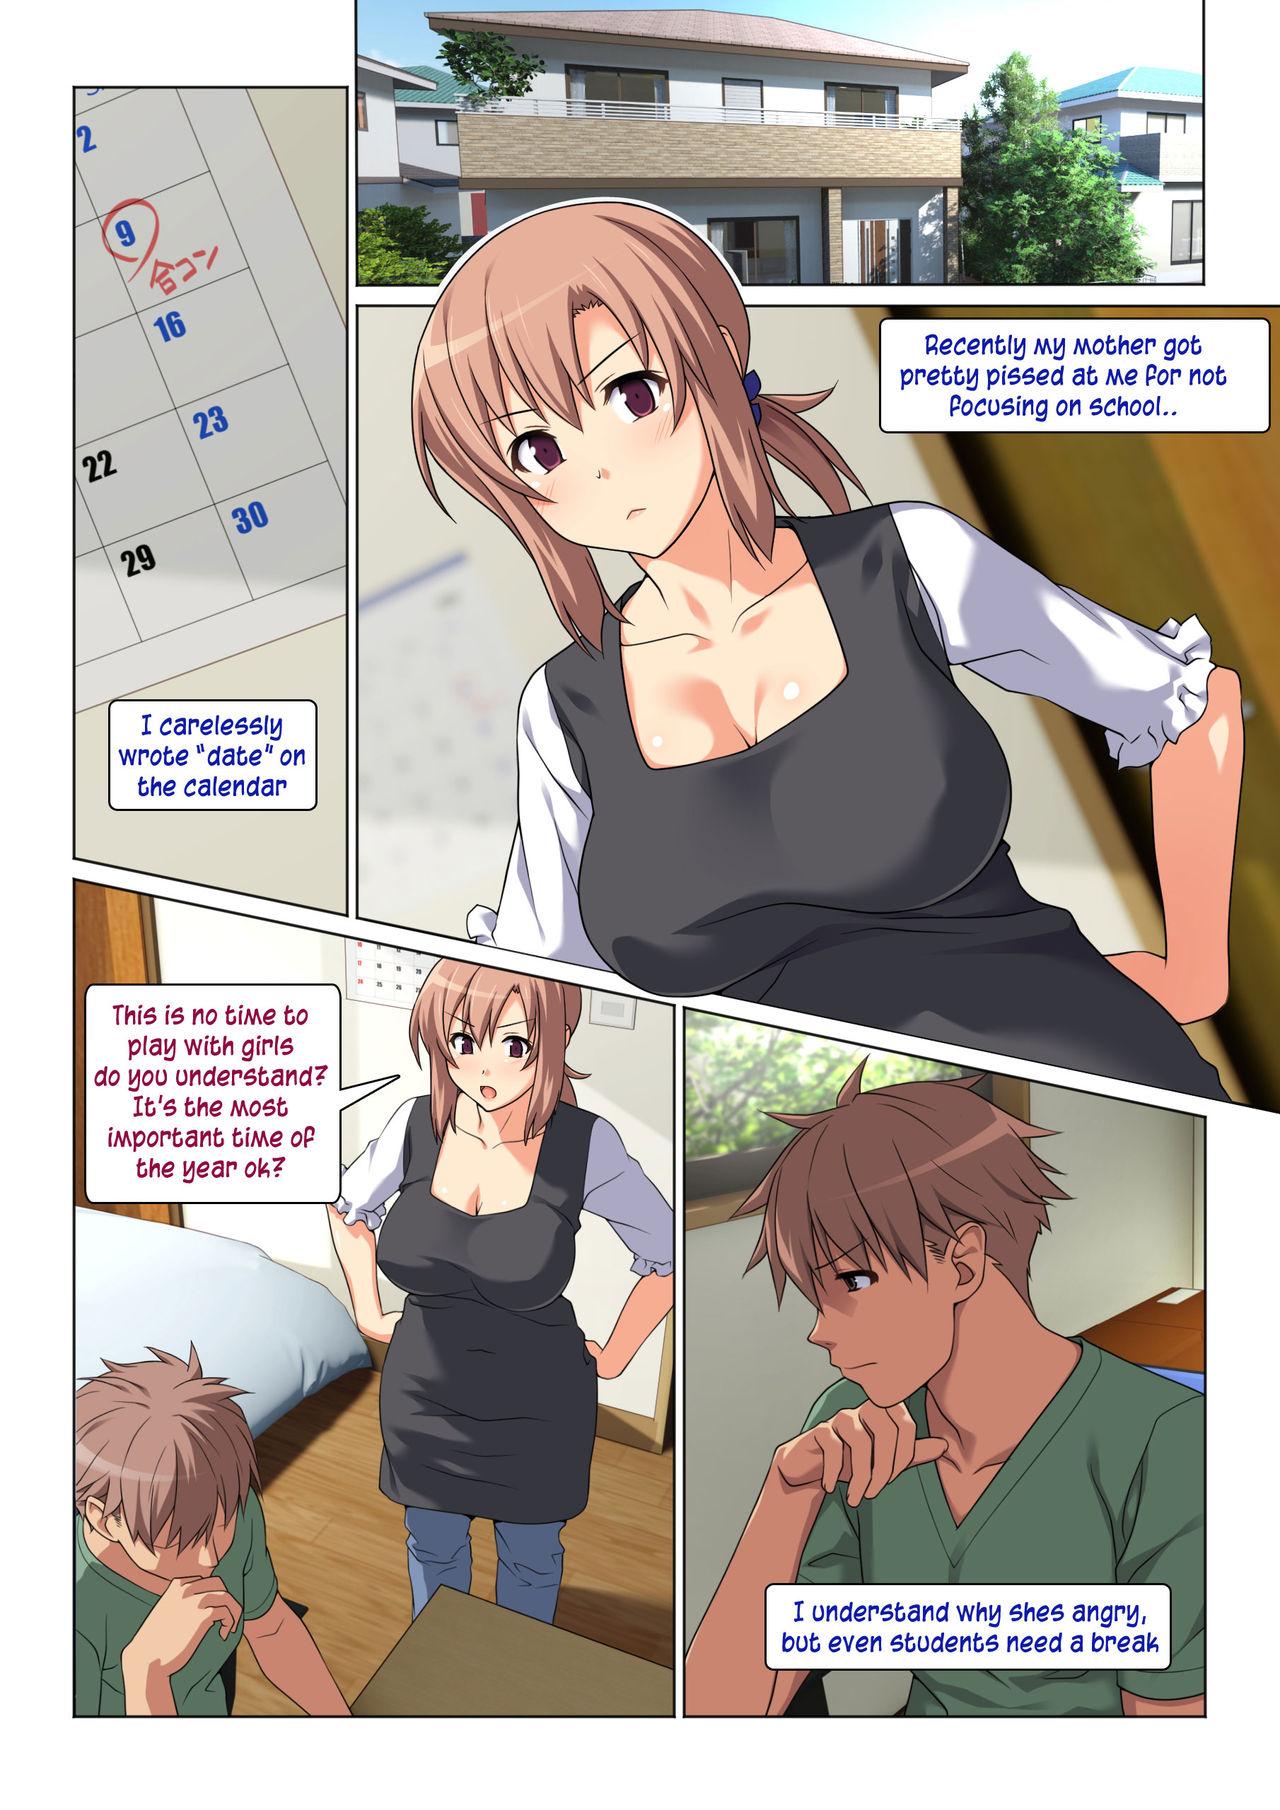 Free Fuck Seiseki UP o Jouken ni Mainichi Nuite kureru Okaa-san | His Mother gets him off every day as long as his grades improve - Original Transsexual - Page 2